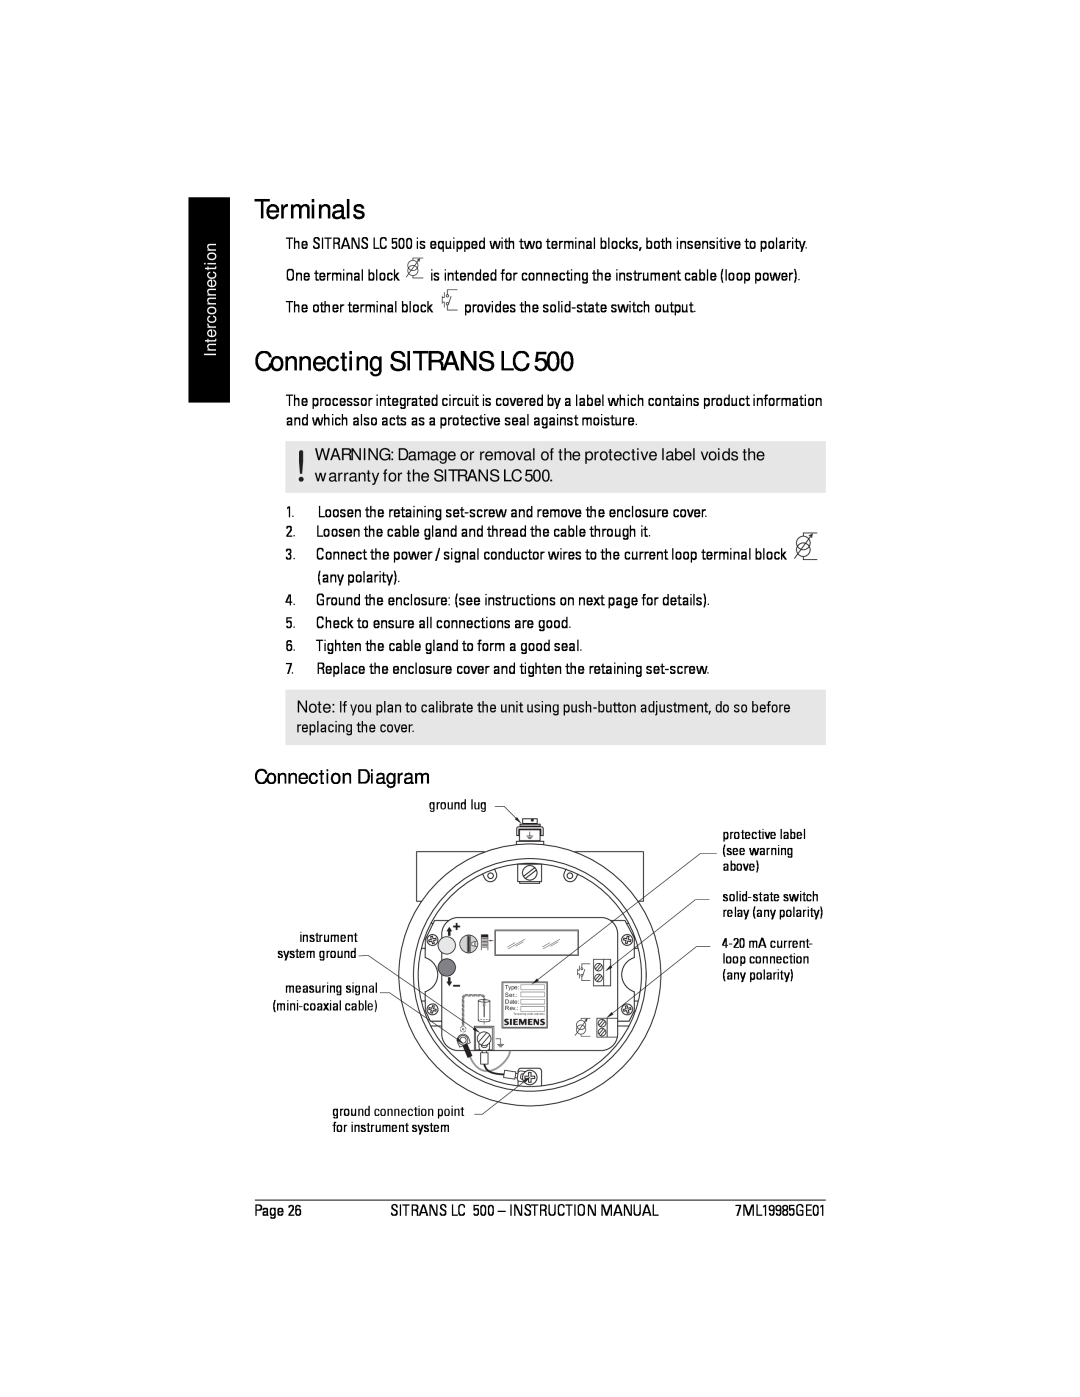 Siemens LC 500, Sitrans instruction manual Terminals, Connecting SITRANS LC, Connection Diagram, Interconnection 